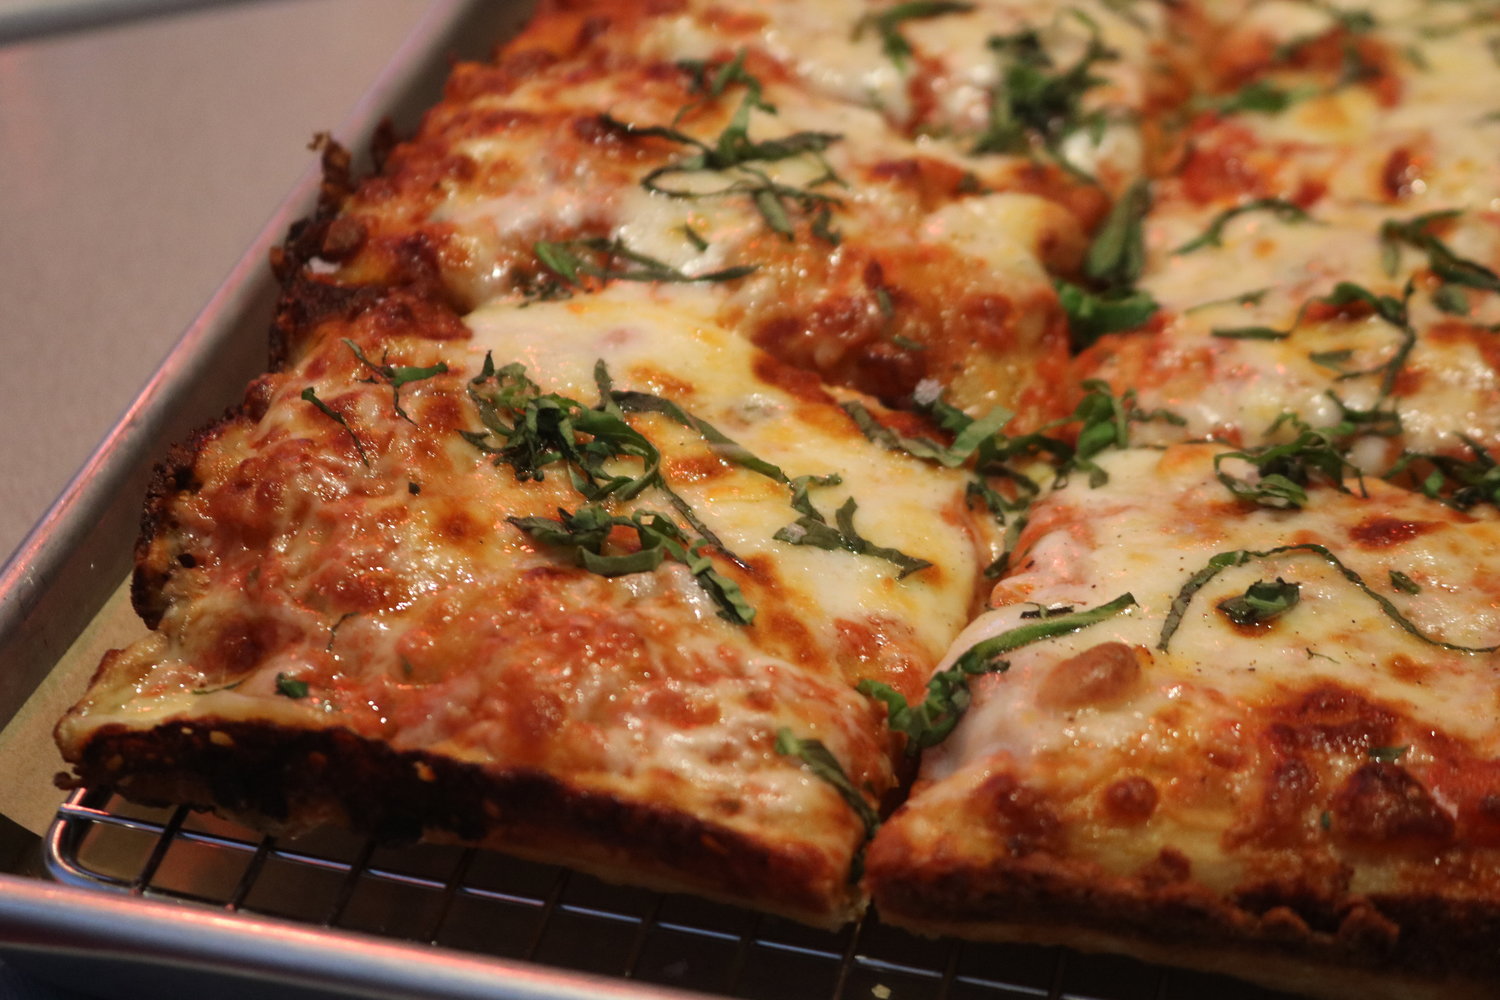 The traditional margherita pizza is topped with tomato sauce, mozzarella and basil.